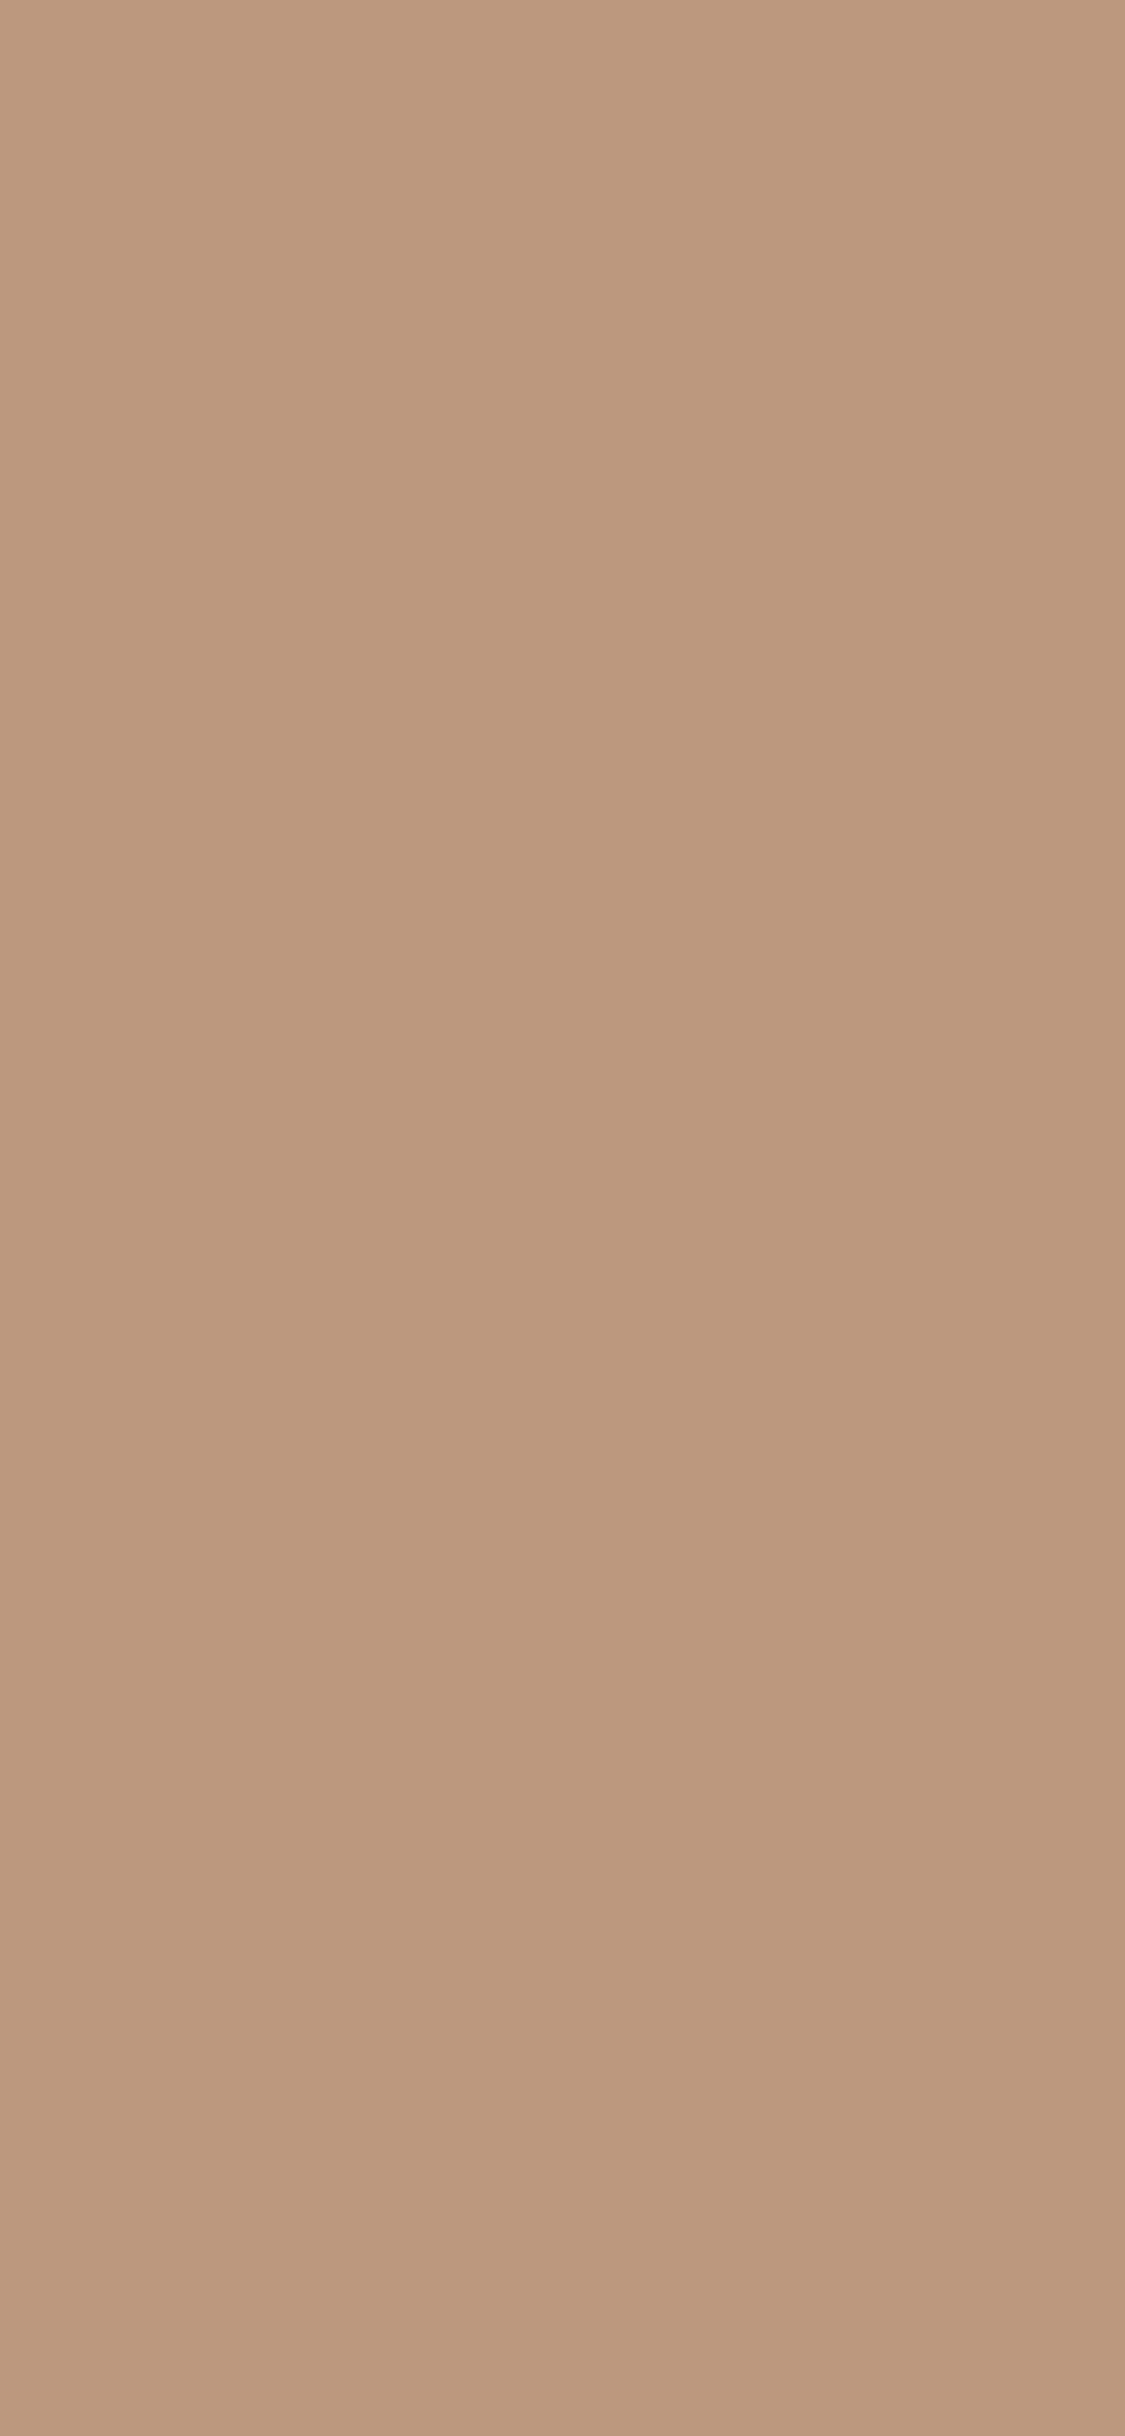 1125x2436 Pale Taupe Solid Color Background